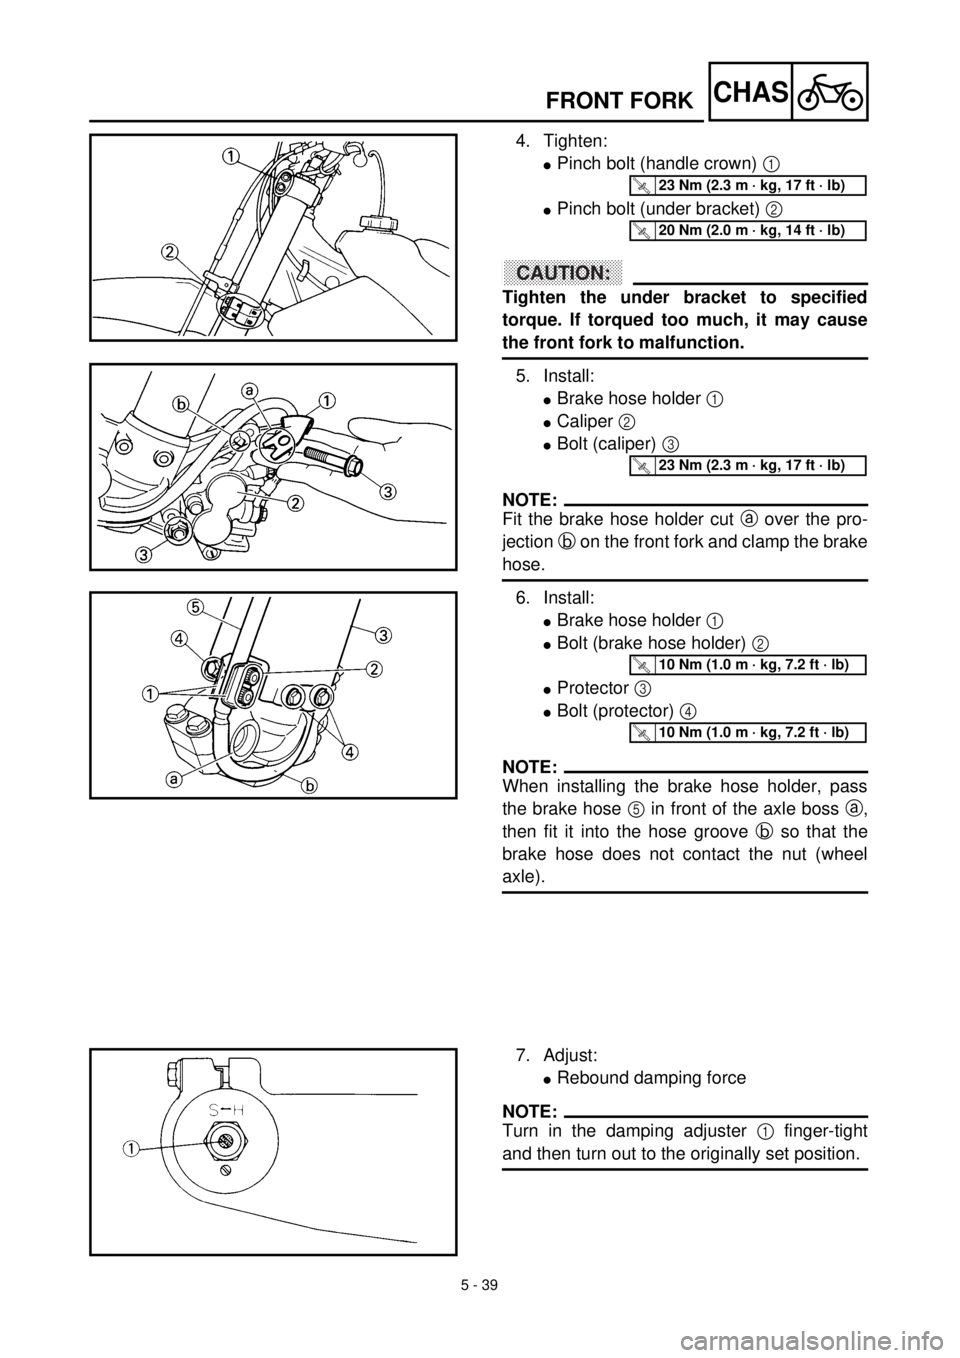 YAMAHA YZ426F 2000  Owners Manual 5 - 39
CHASFRONT FORK
4. Tighten:
lPinch bolt (handle crown) 1 
lPinch bolt (under bracket) 2 
ACHTUNG:CAUTION:
Tighten the under bracket to specified
torque. If torqued too much, it may cause
the fro